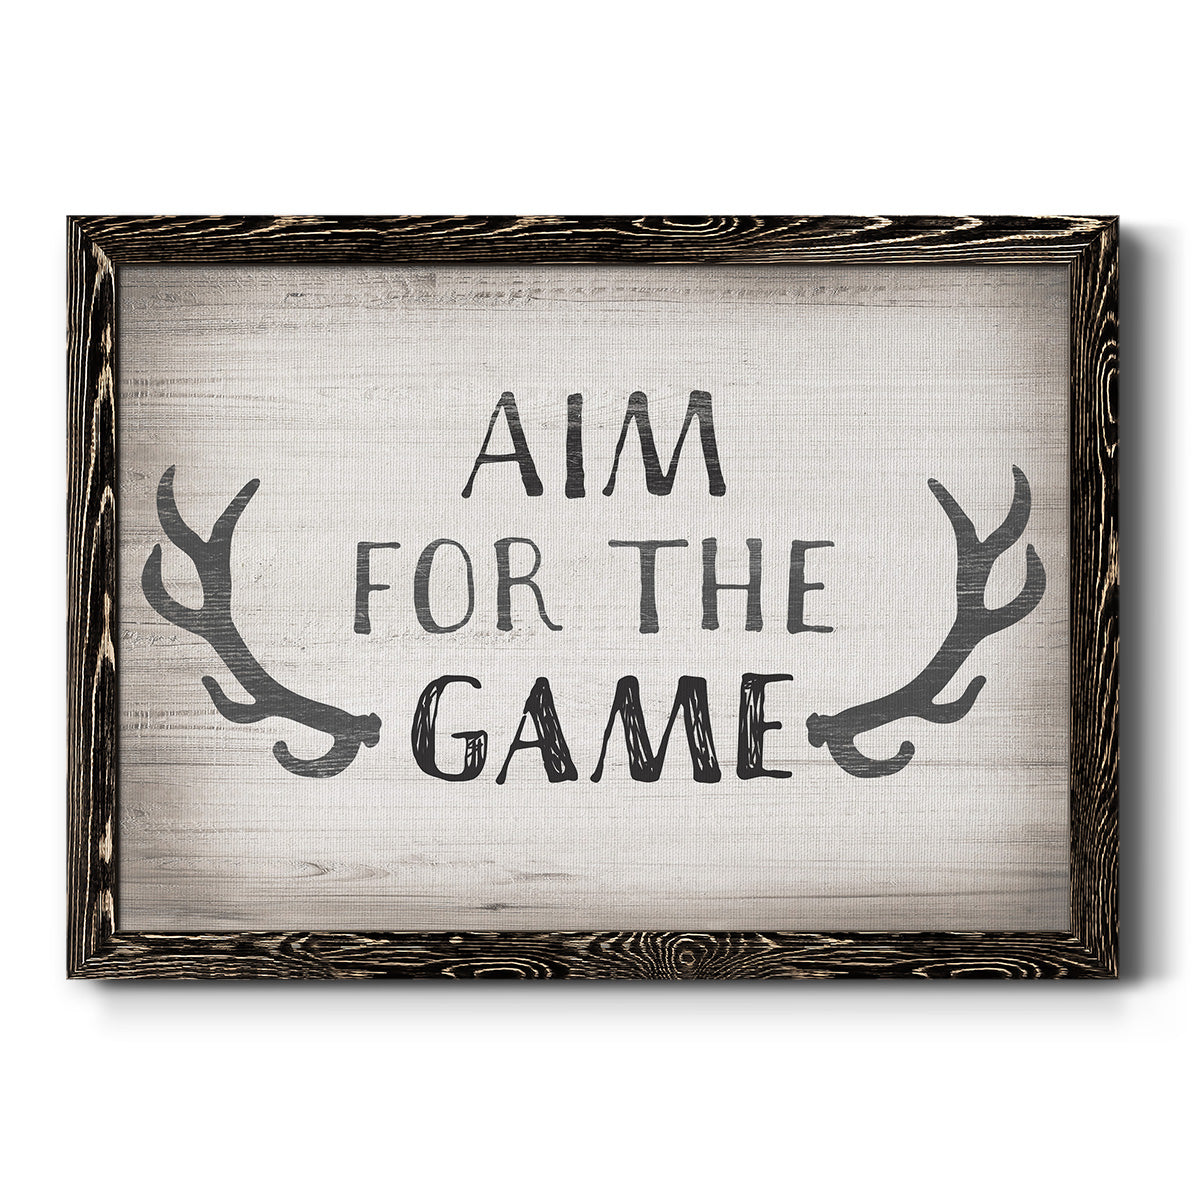 Aim Game-Premium Framed Canvas - Ready to Hang